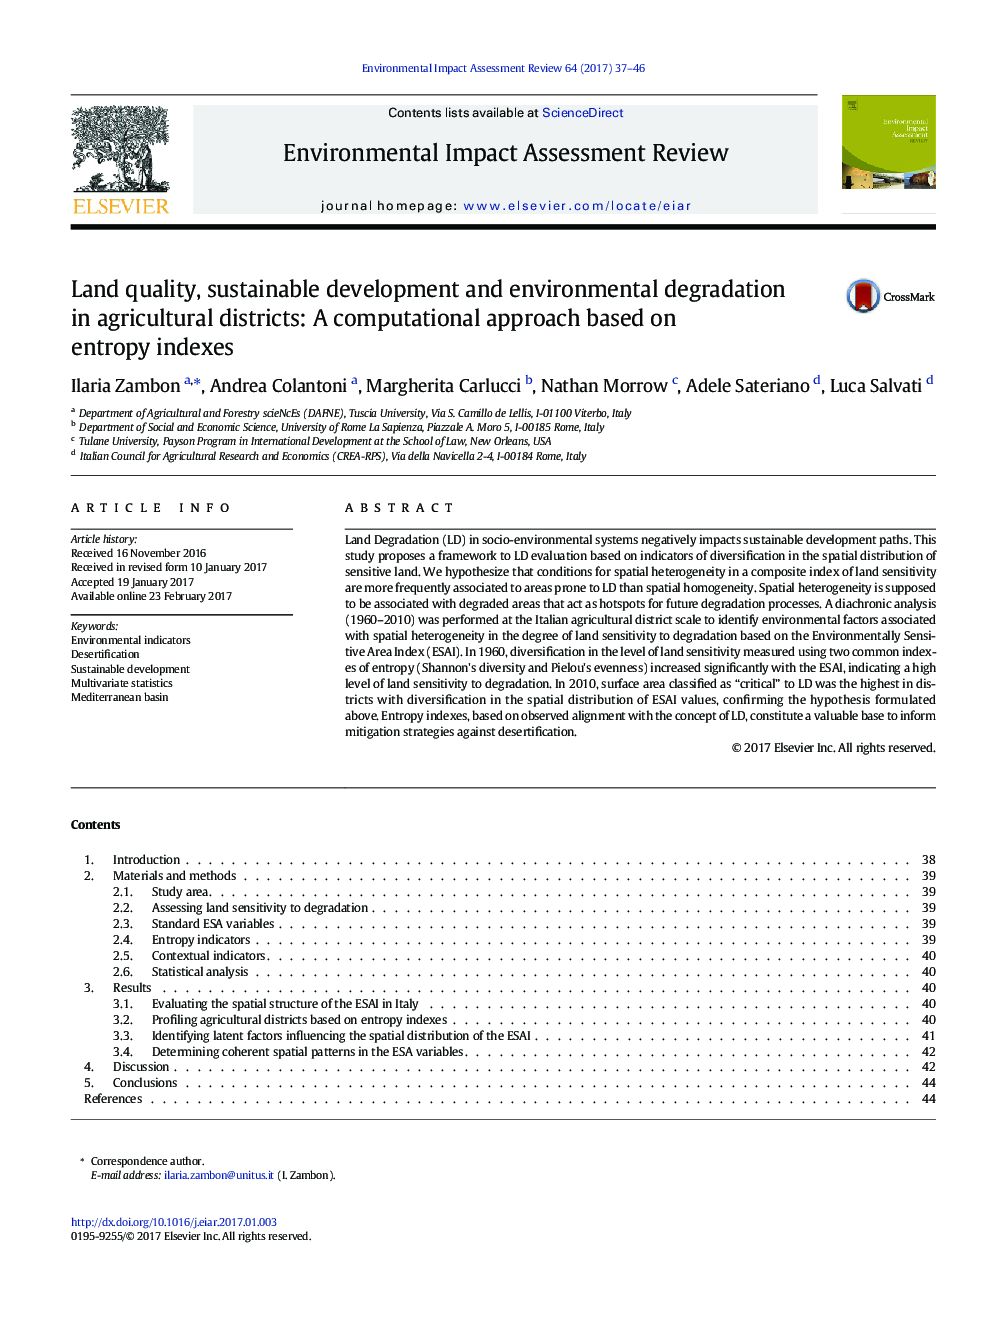 Land quality, sustainable development and environmental degradation in agricultural districts: A computational approach based on entropy indexes